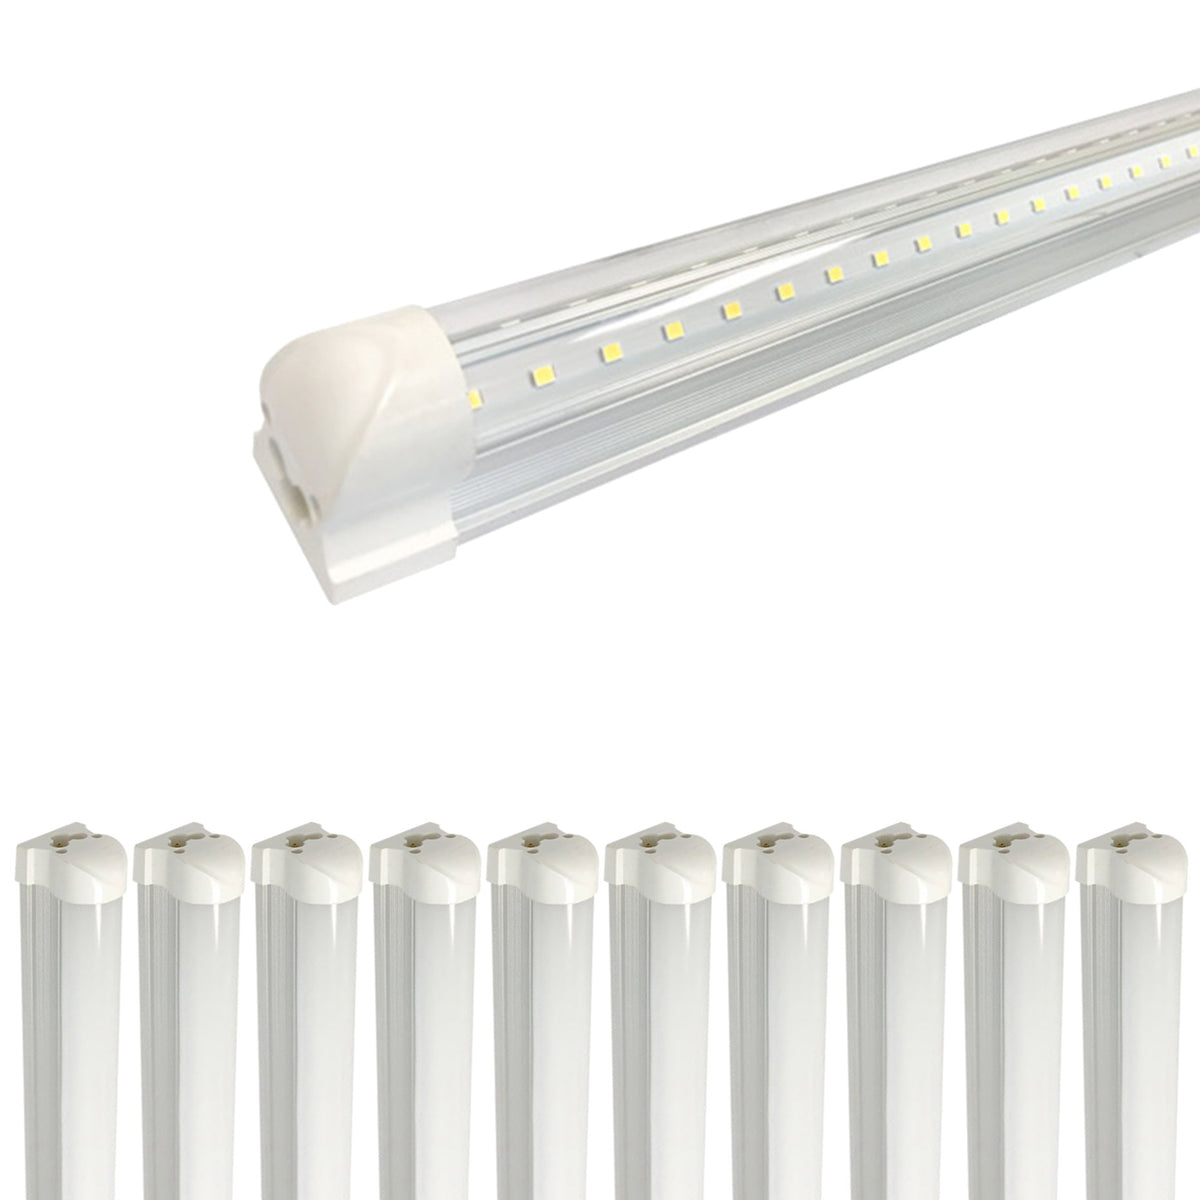 Picture of Viribright 519017 5000K 48 in. 30W Tube LED Tubular Bulb, Clear - Pack of 10